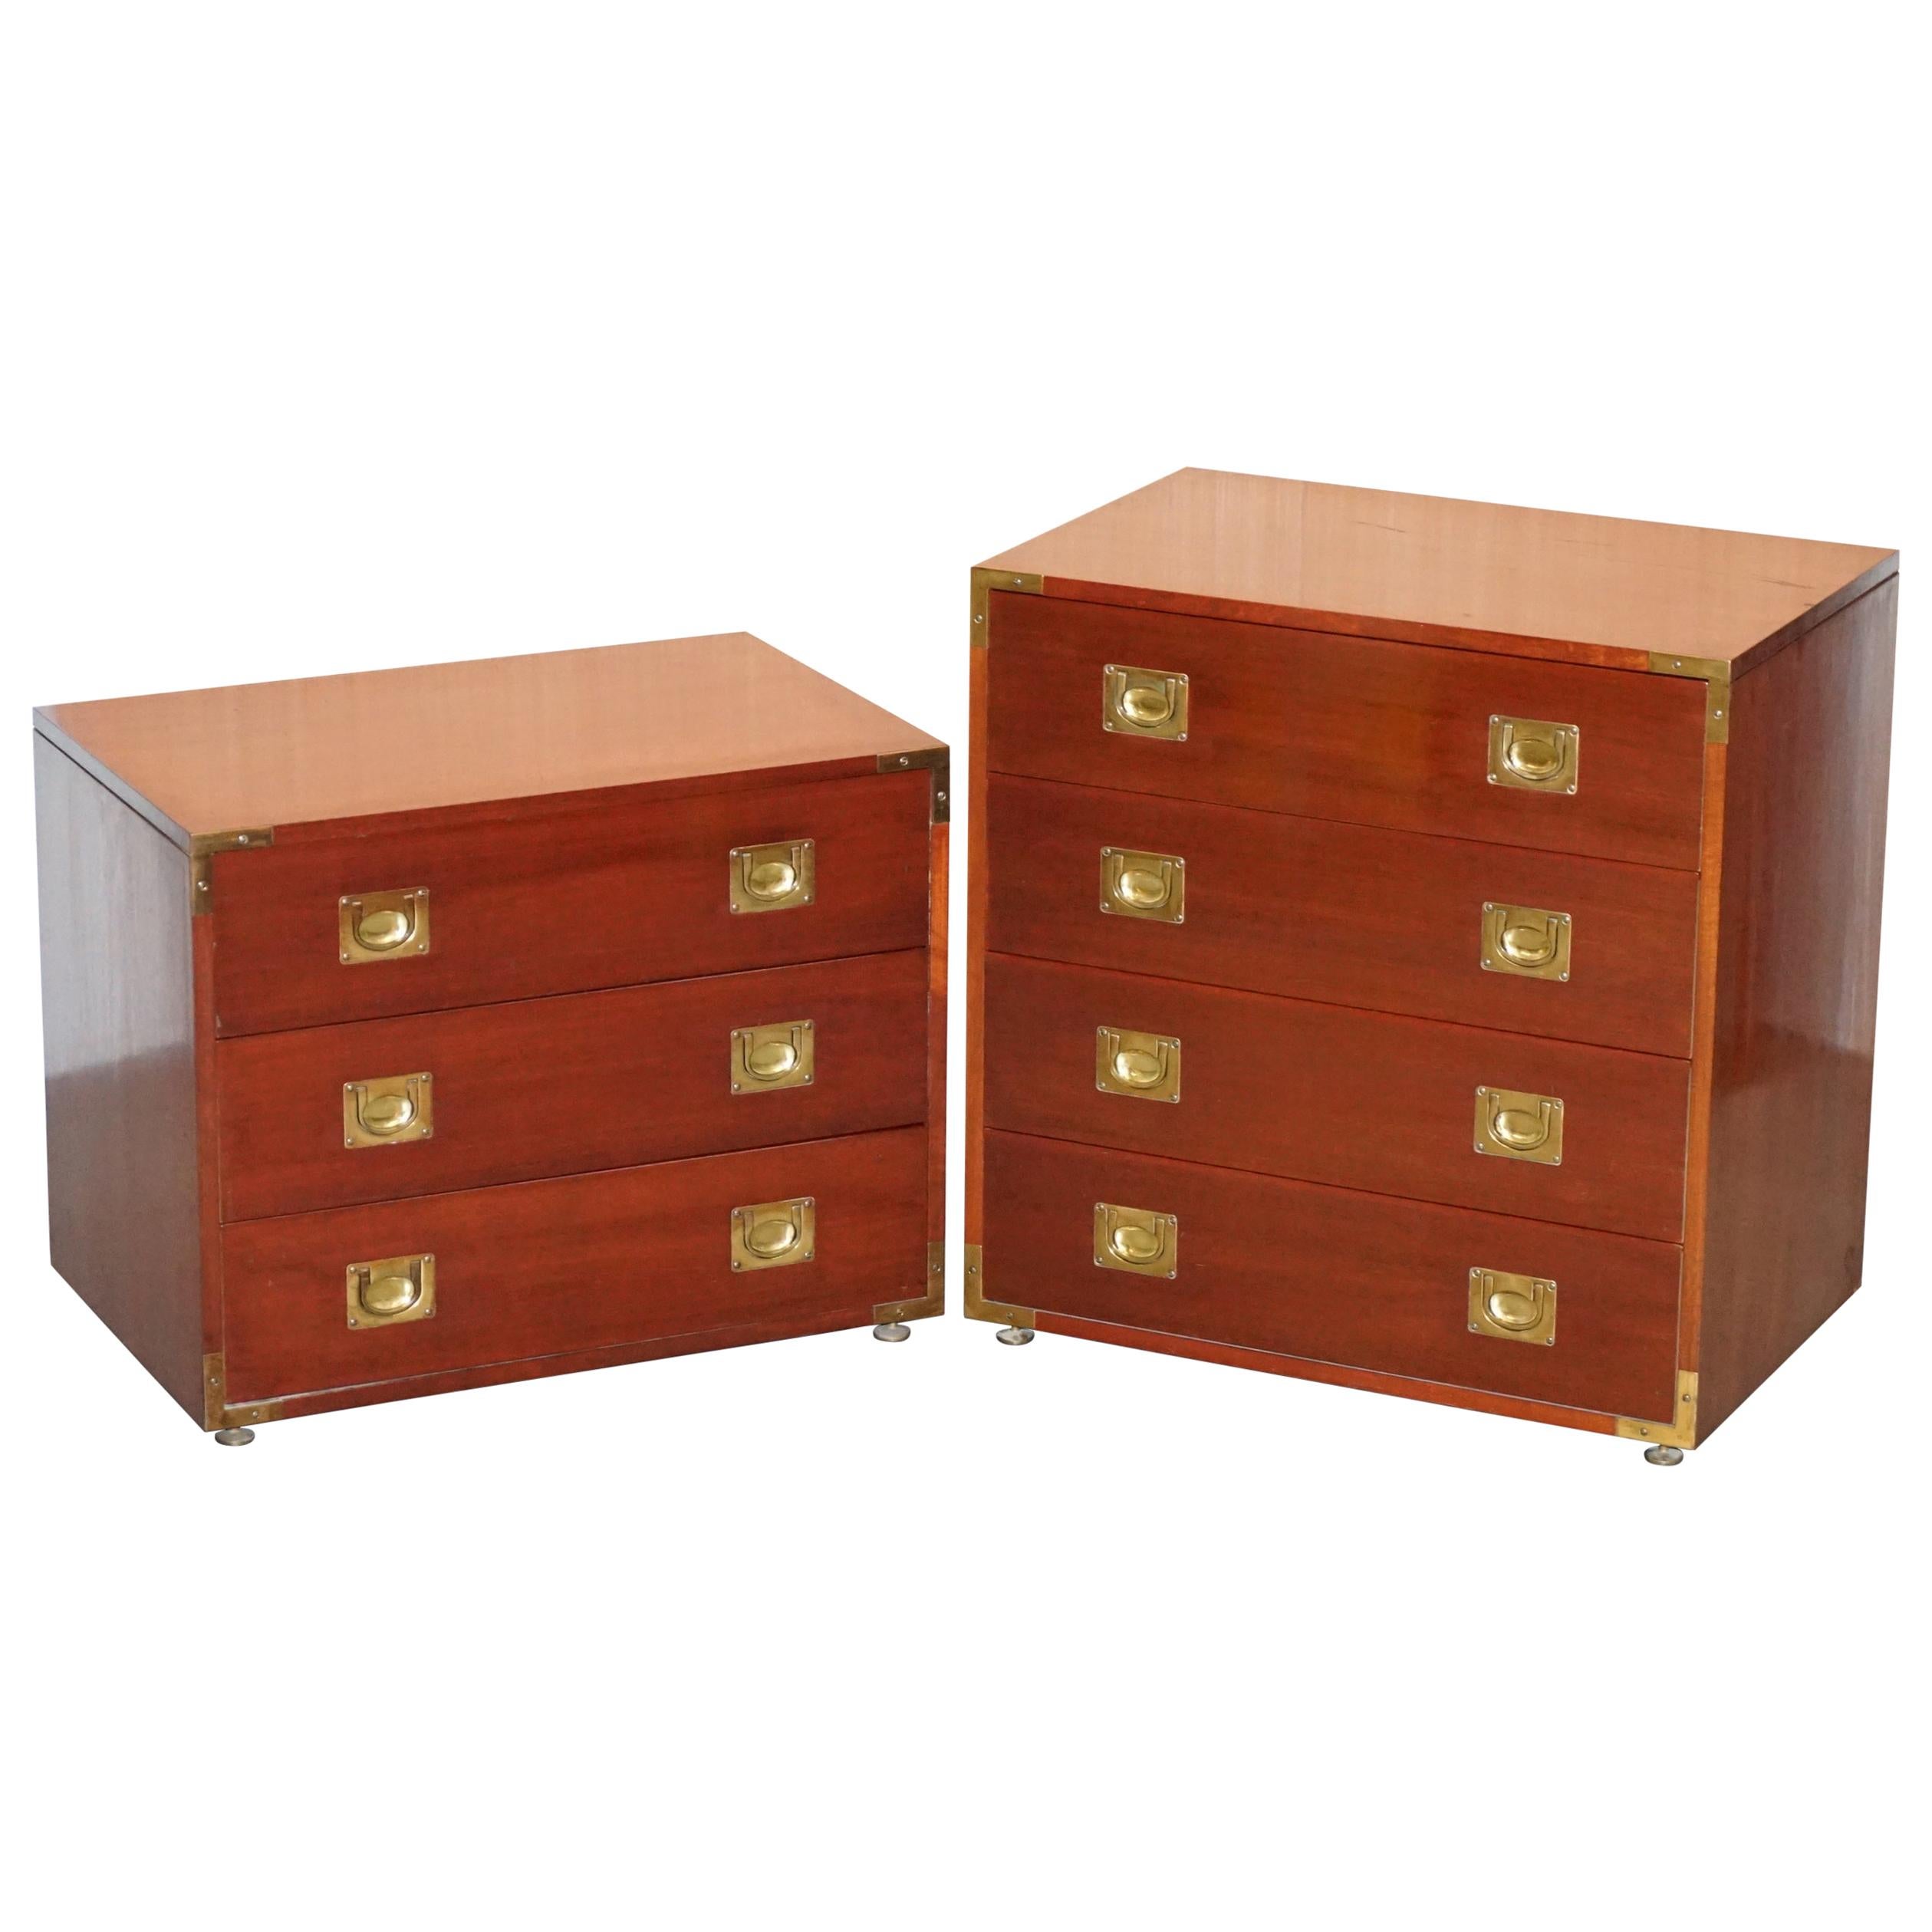 Pair of Mahogany Military Campaign Style Chests of Drawers Nice Sizes Any Room